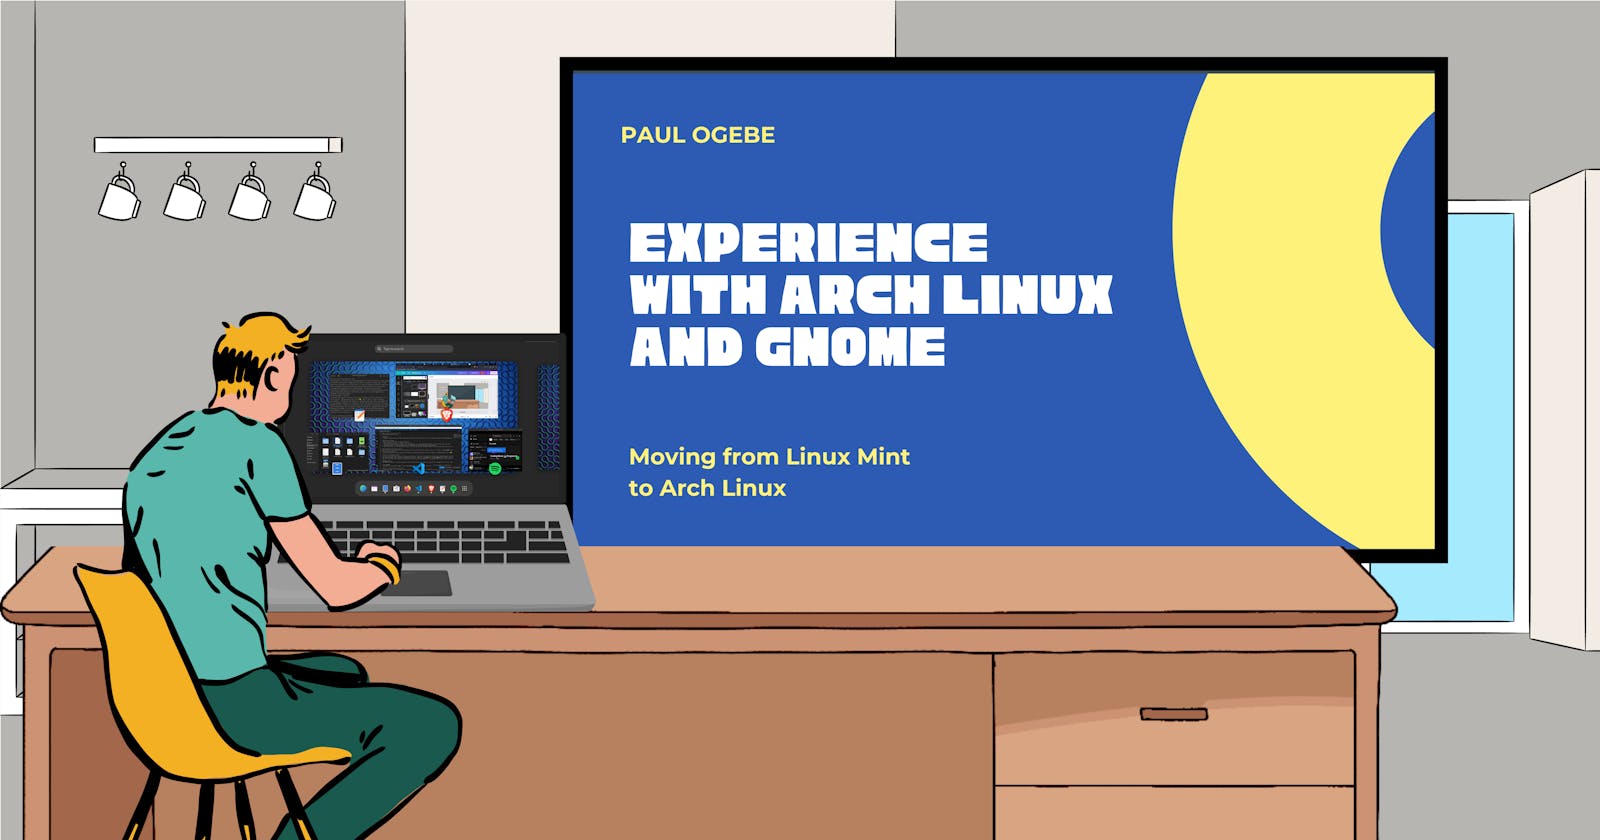 My Experience with Arch Linux